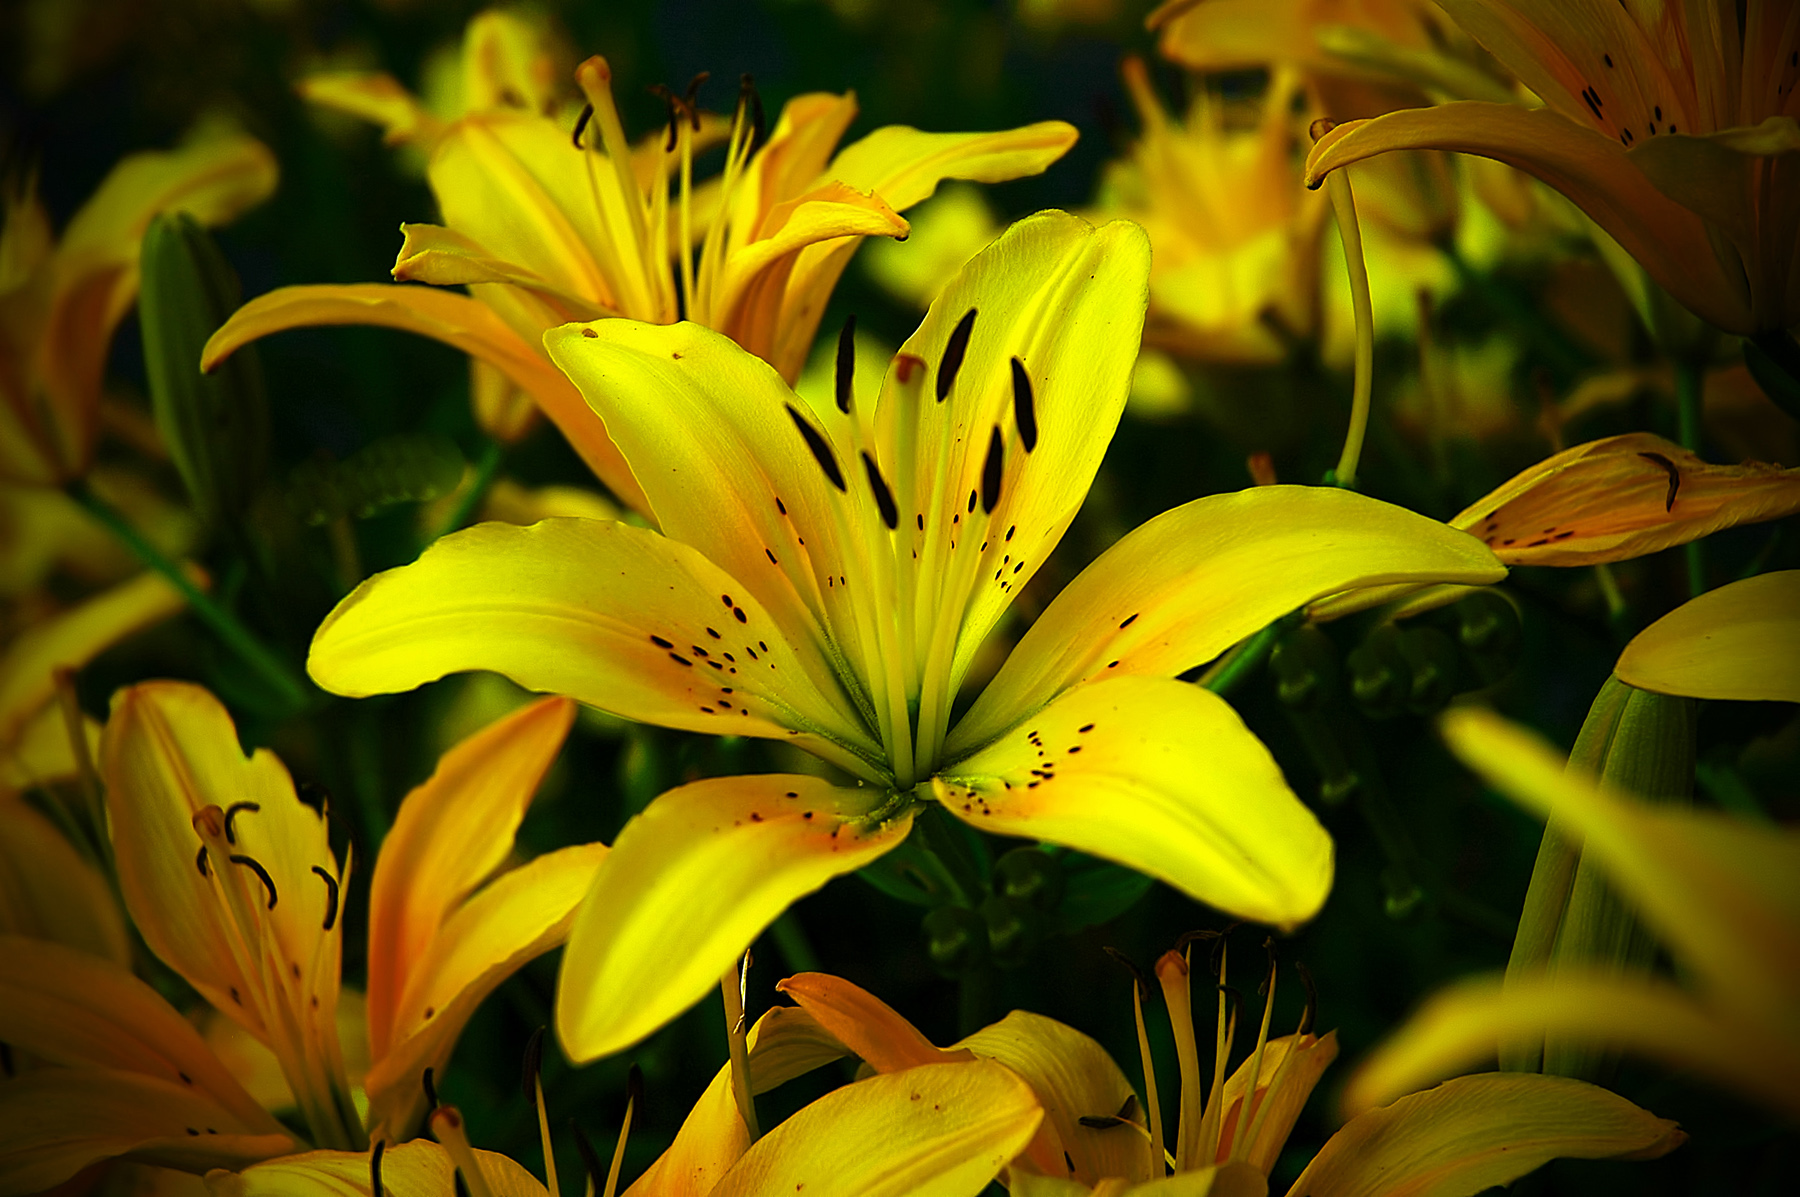 Lilies At Sunset (user submitted)